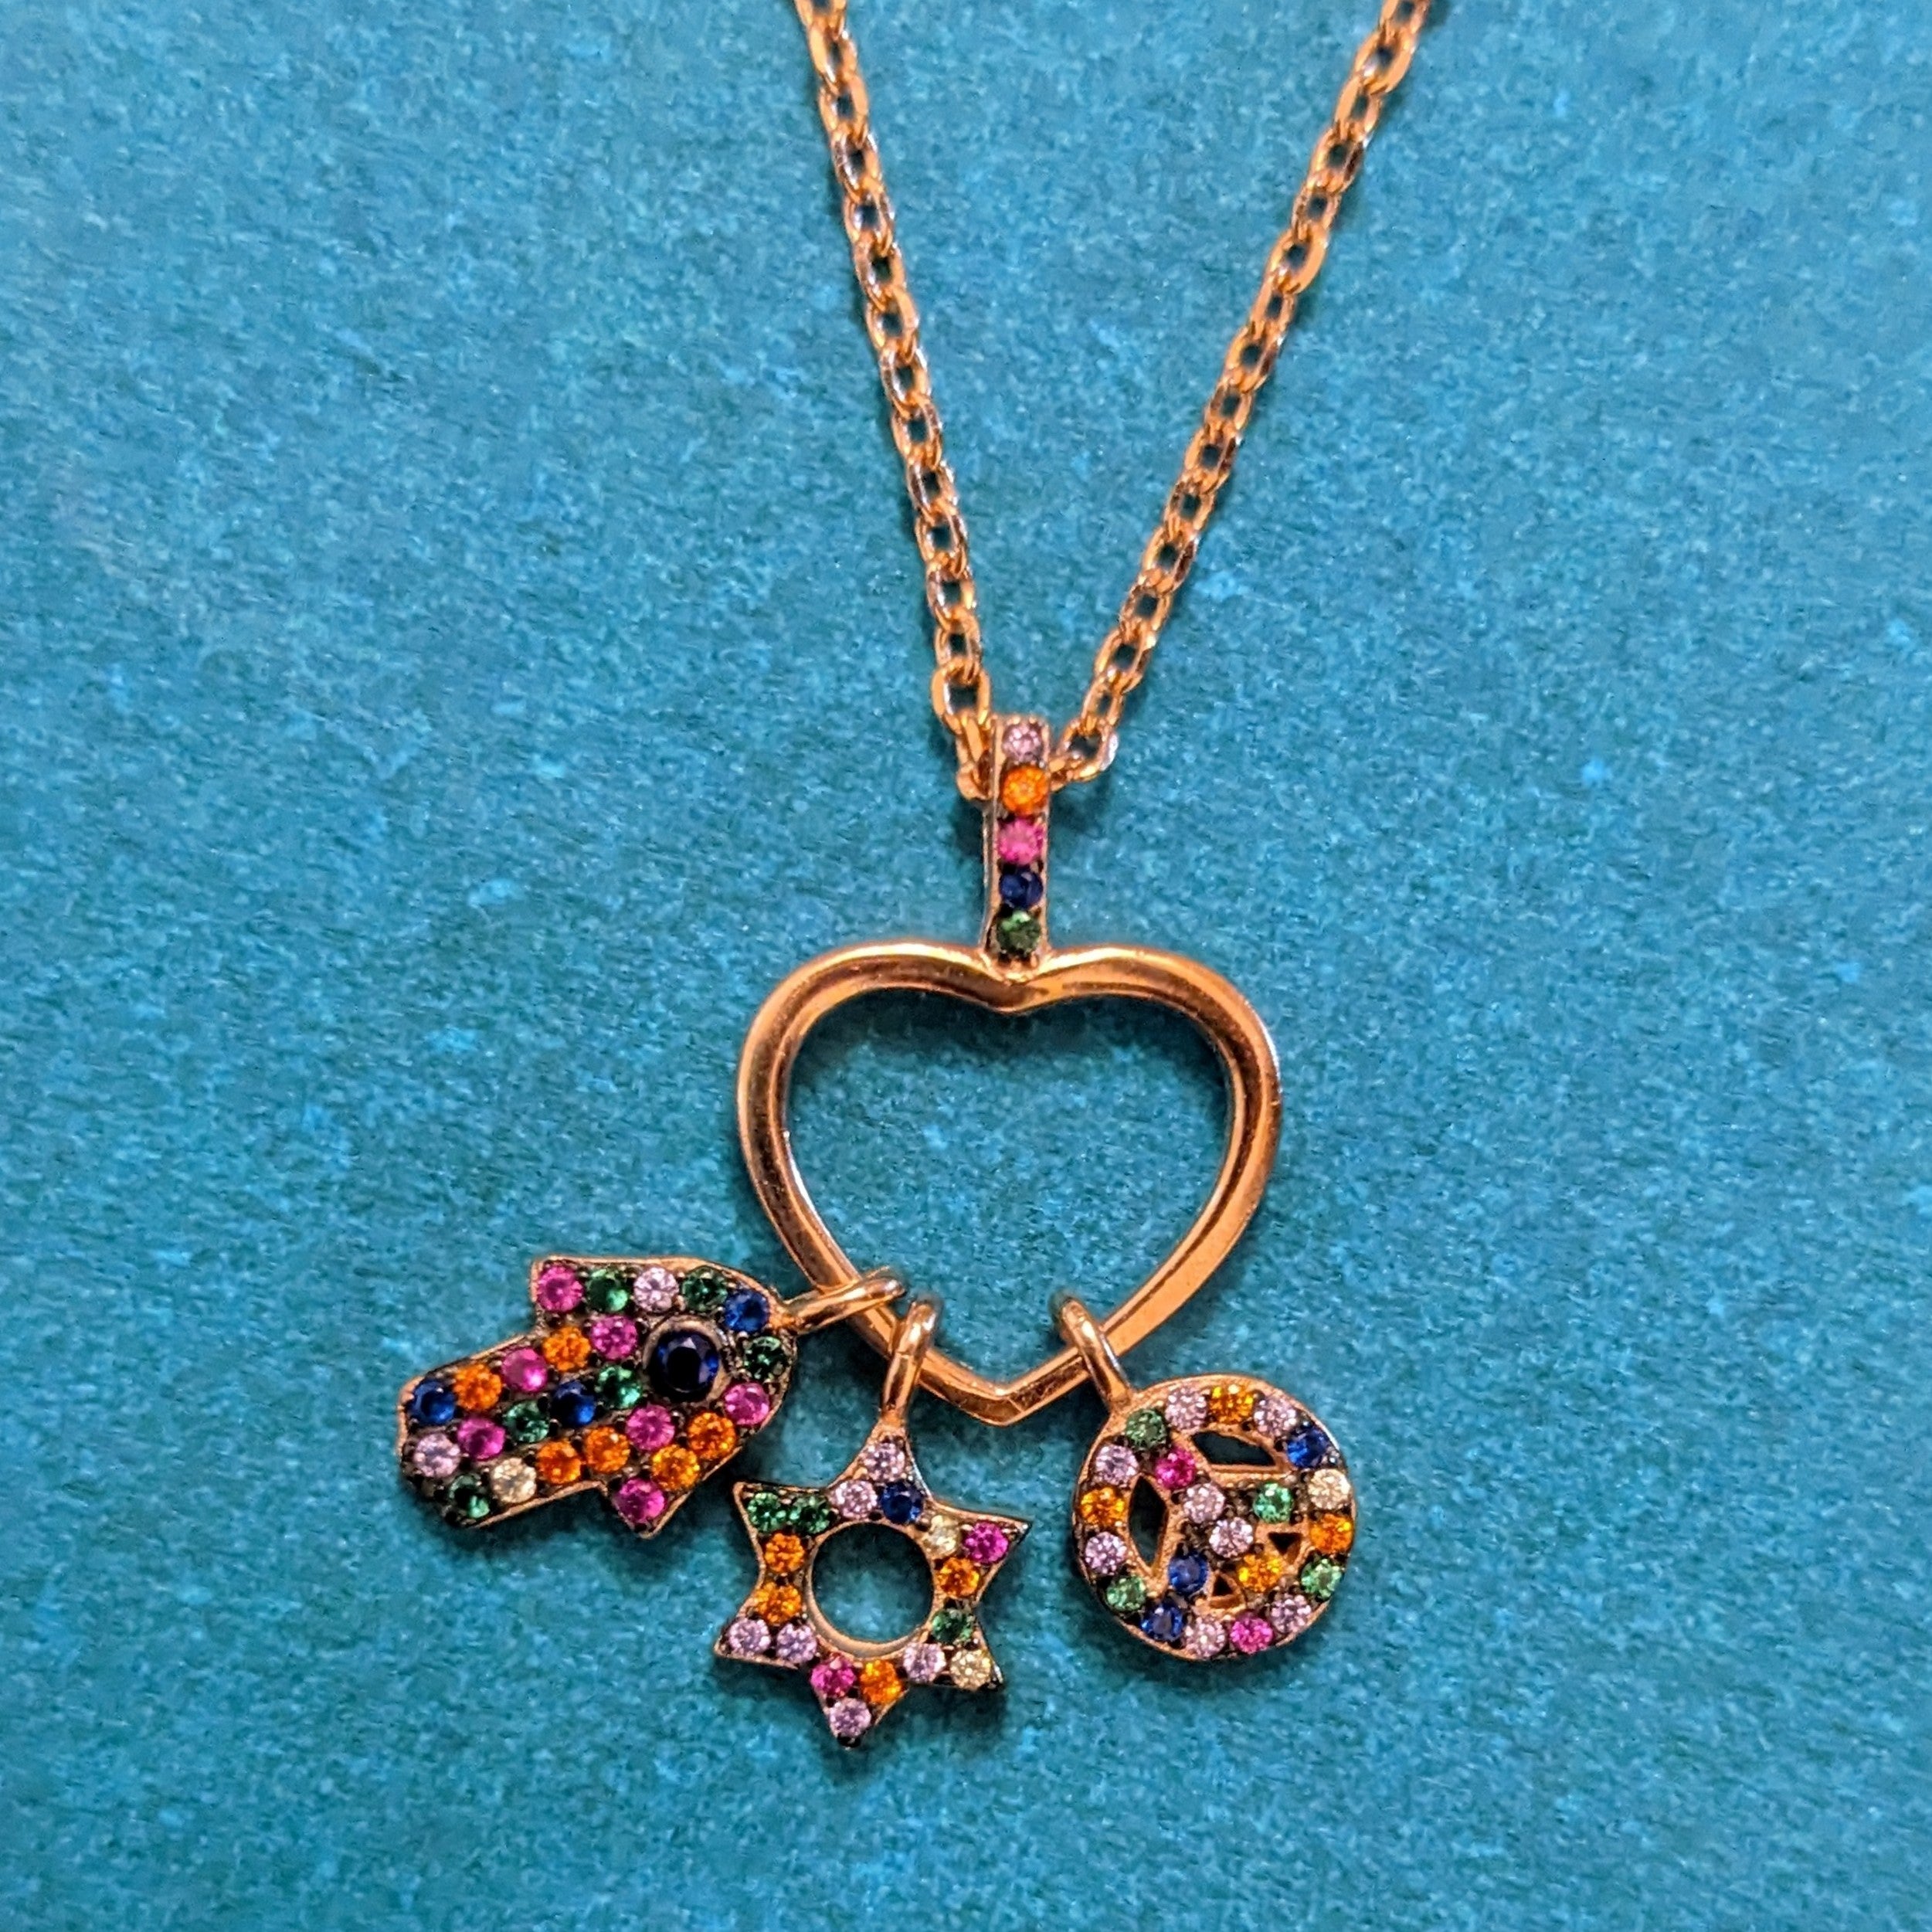 Heart of Fun Necklace